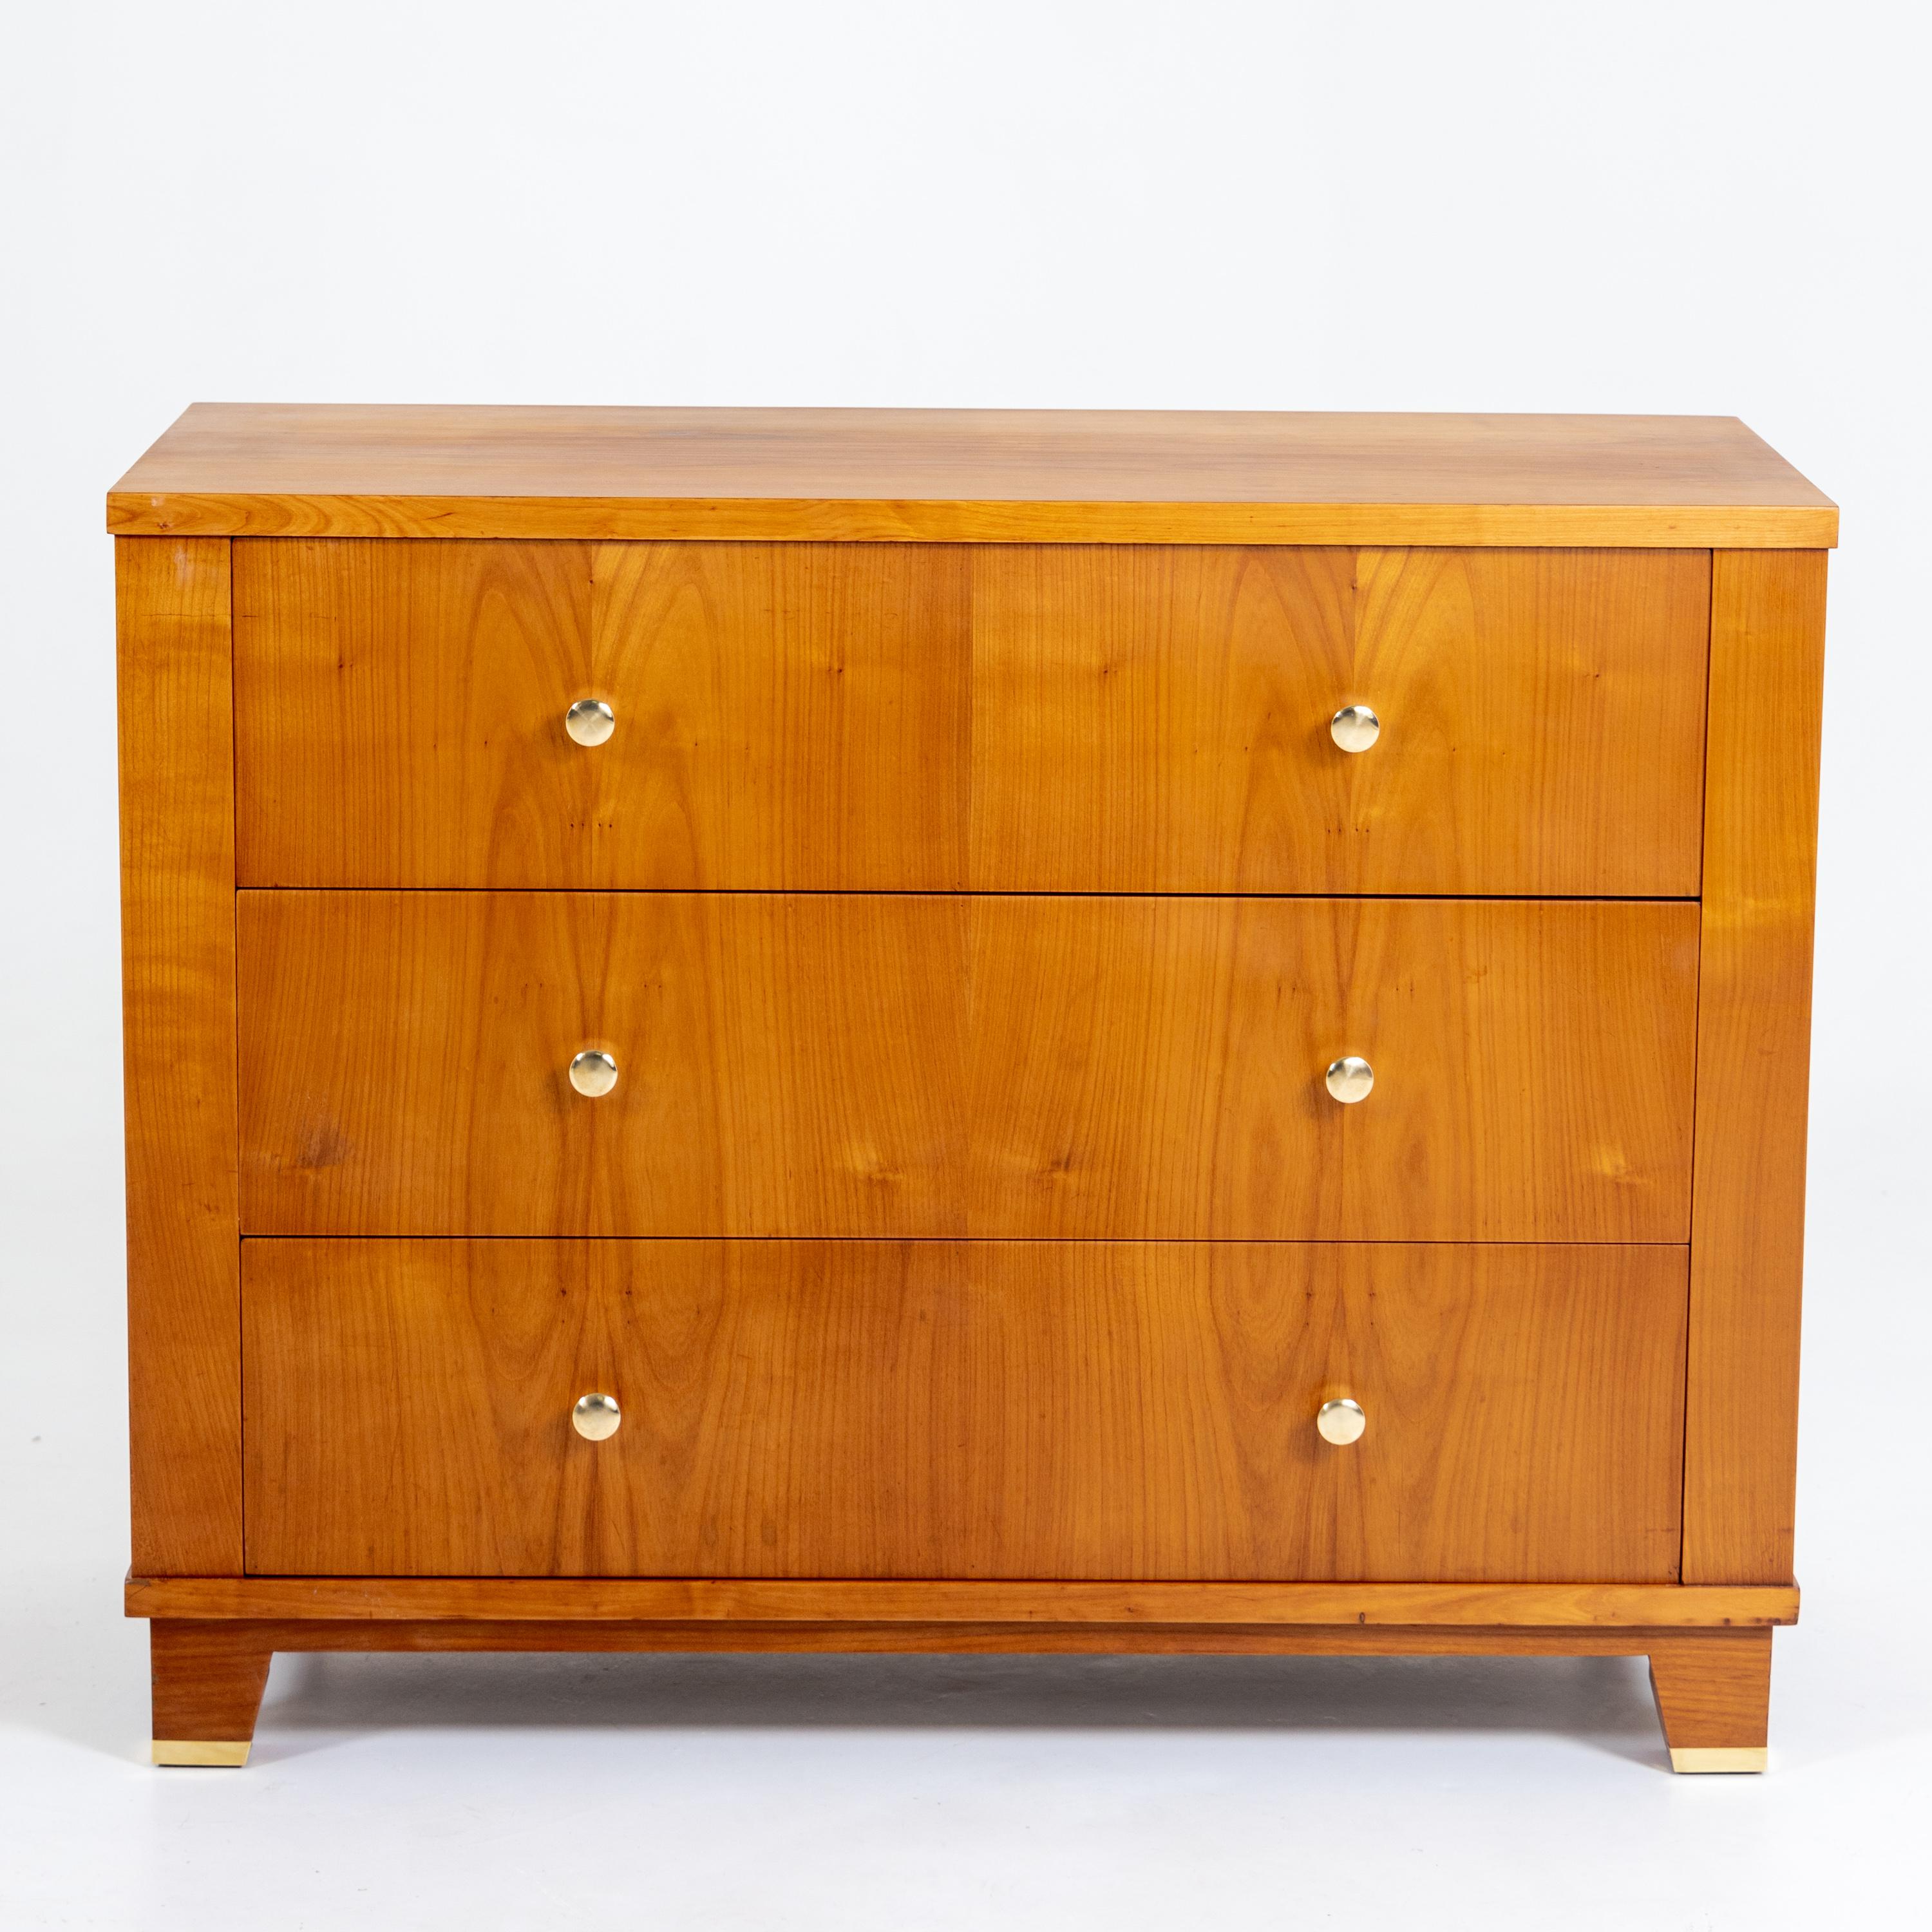 Dresser with three drawers and polished brass knobs made of cherry.